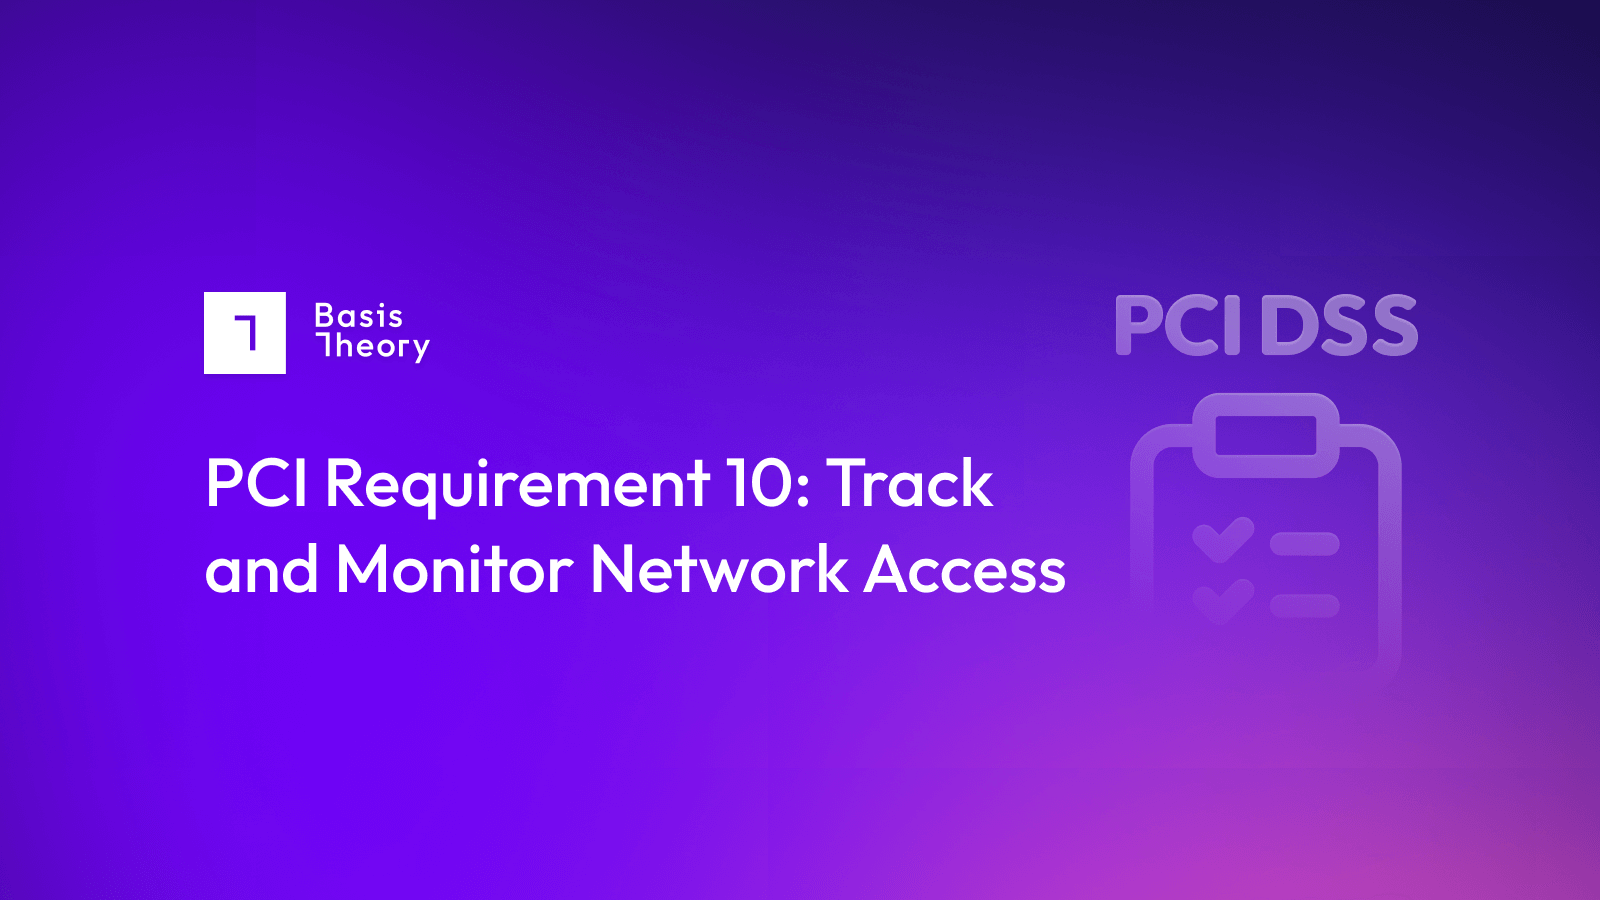 PCI DSS Requirement 10: Track and Monitor Network Access